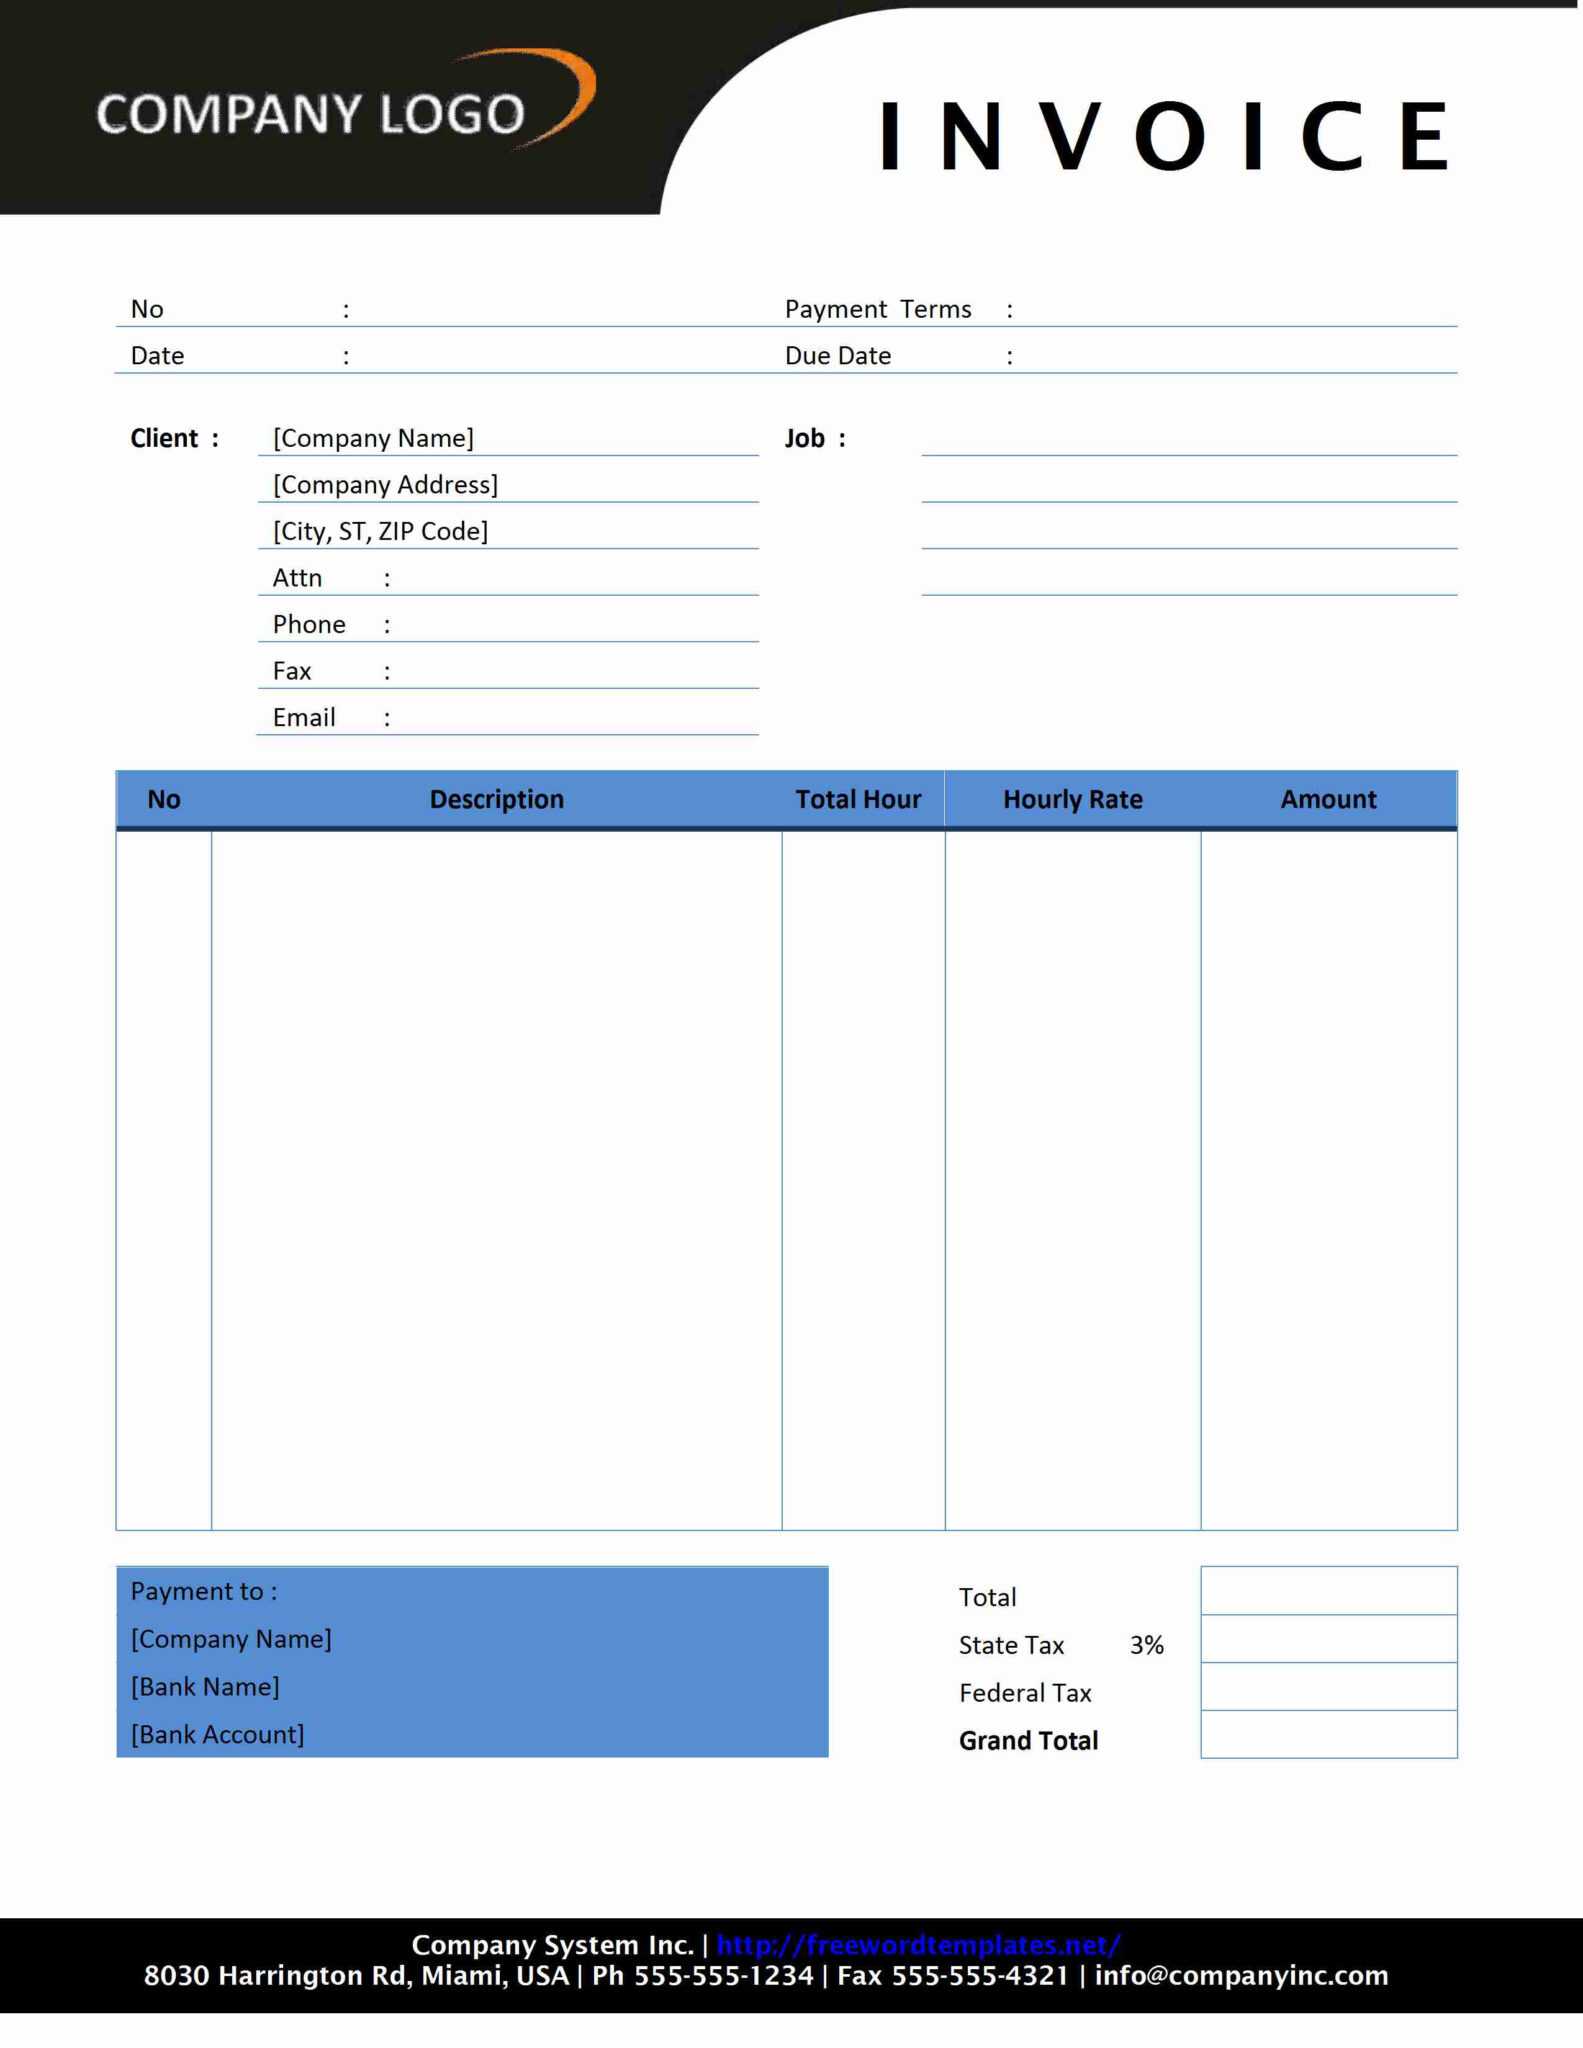 invoice-template-for-openoffice-luxury-download-form-free-for-invoice